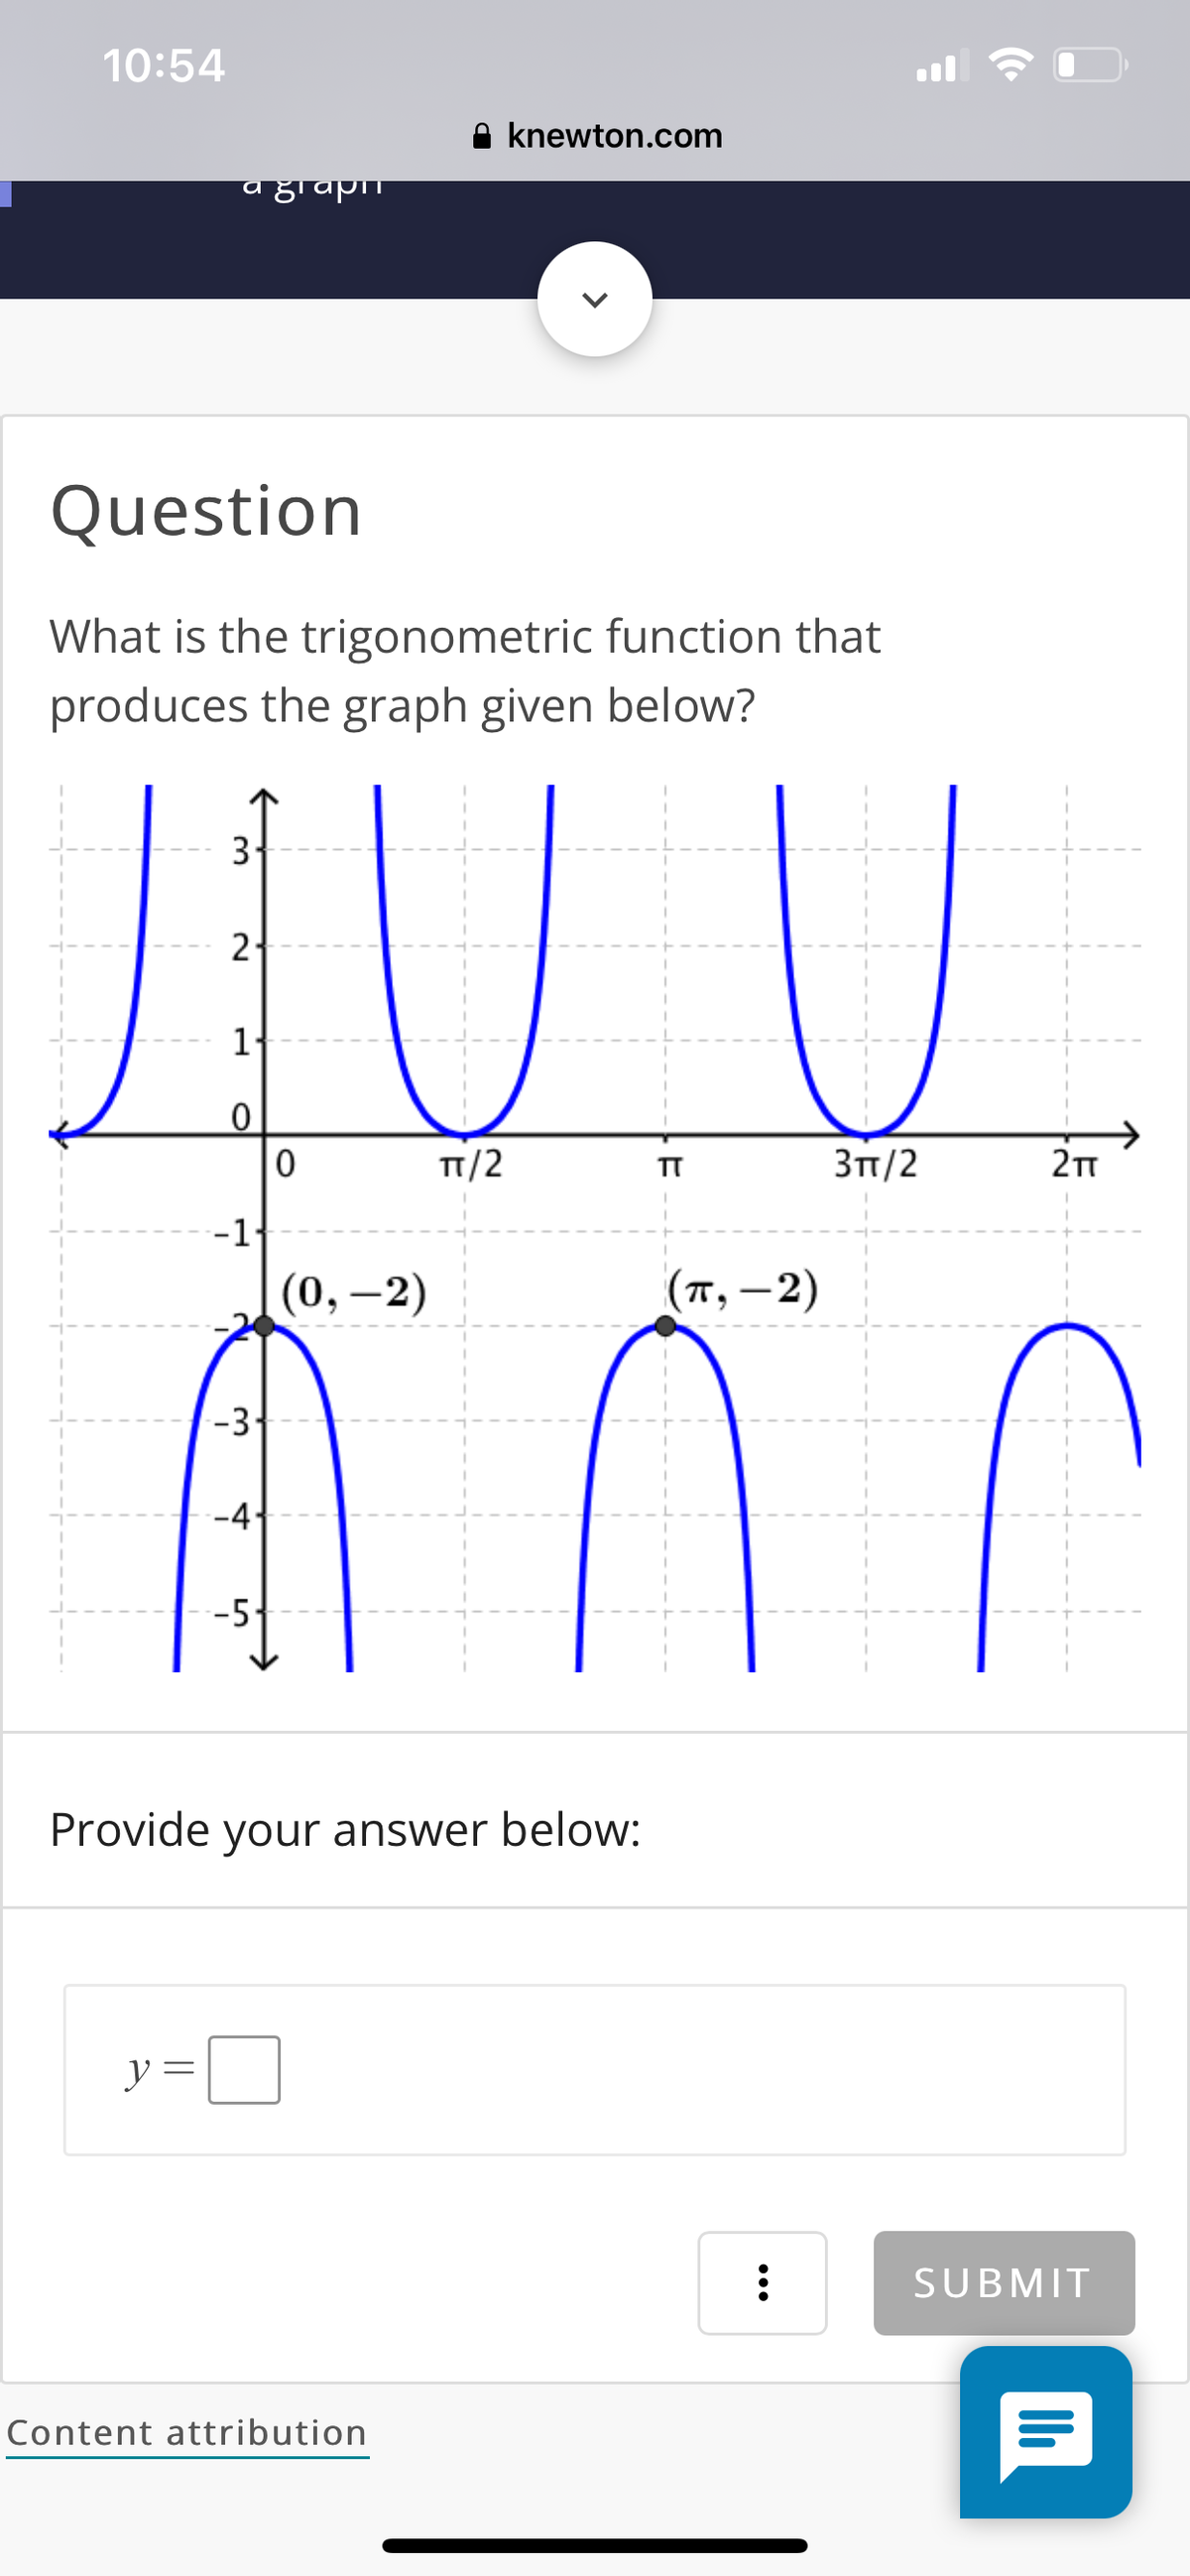 10:54
knewton.com
Question
What is the trigonometric function that
produces the graph given below?
3
2
1
п/2
TT
Зп/2
-11
(0, –2)
(п, —2)
-3
-4
-5.
Provide your answer below:
y =
SUBMIT
Content attribution
